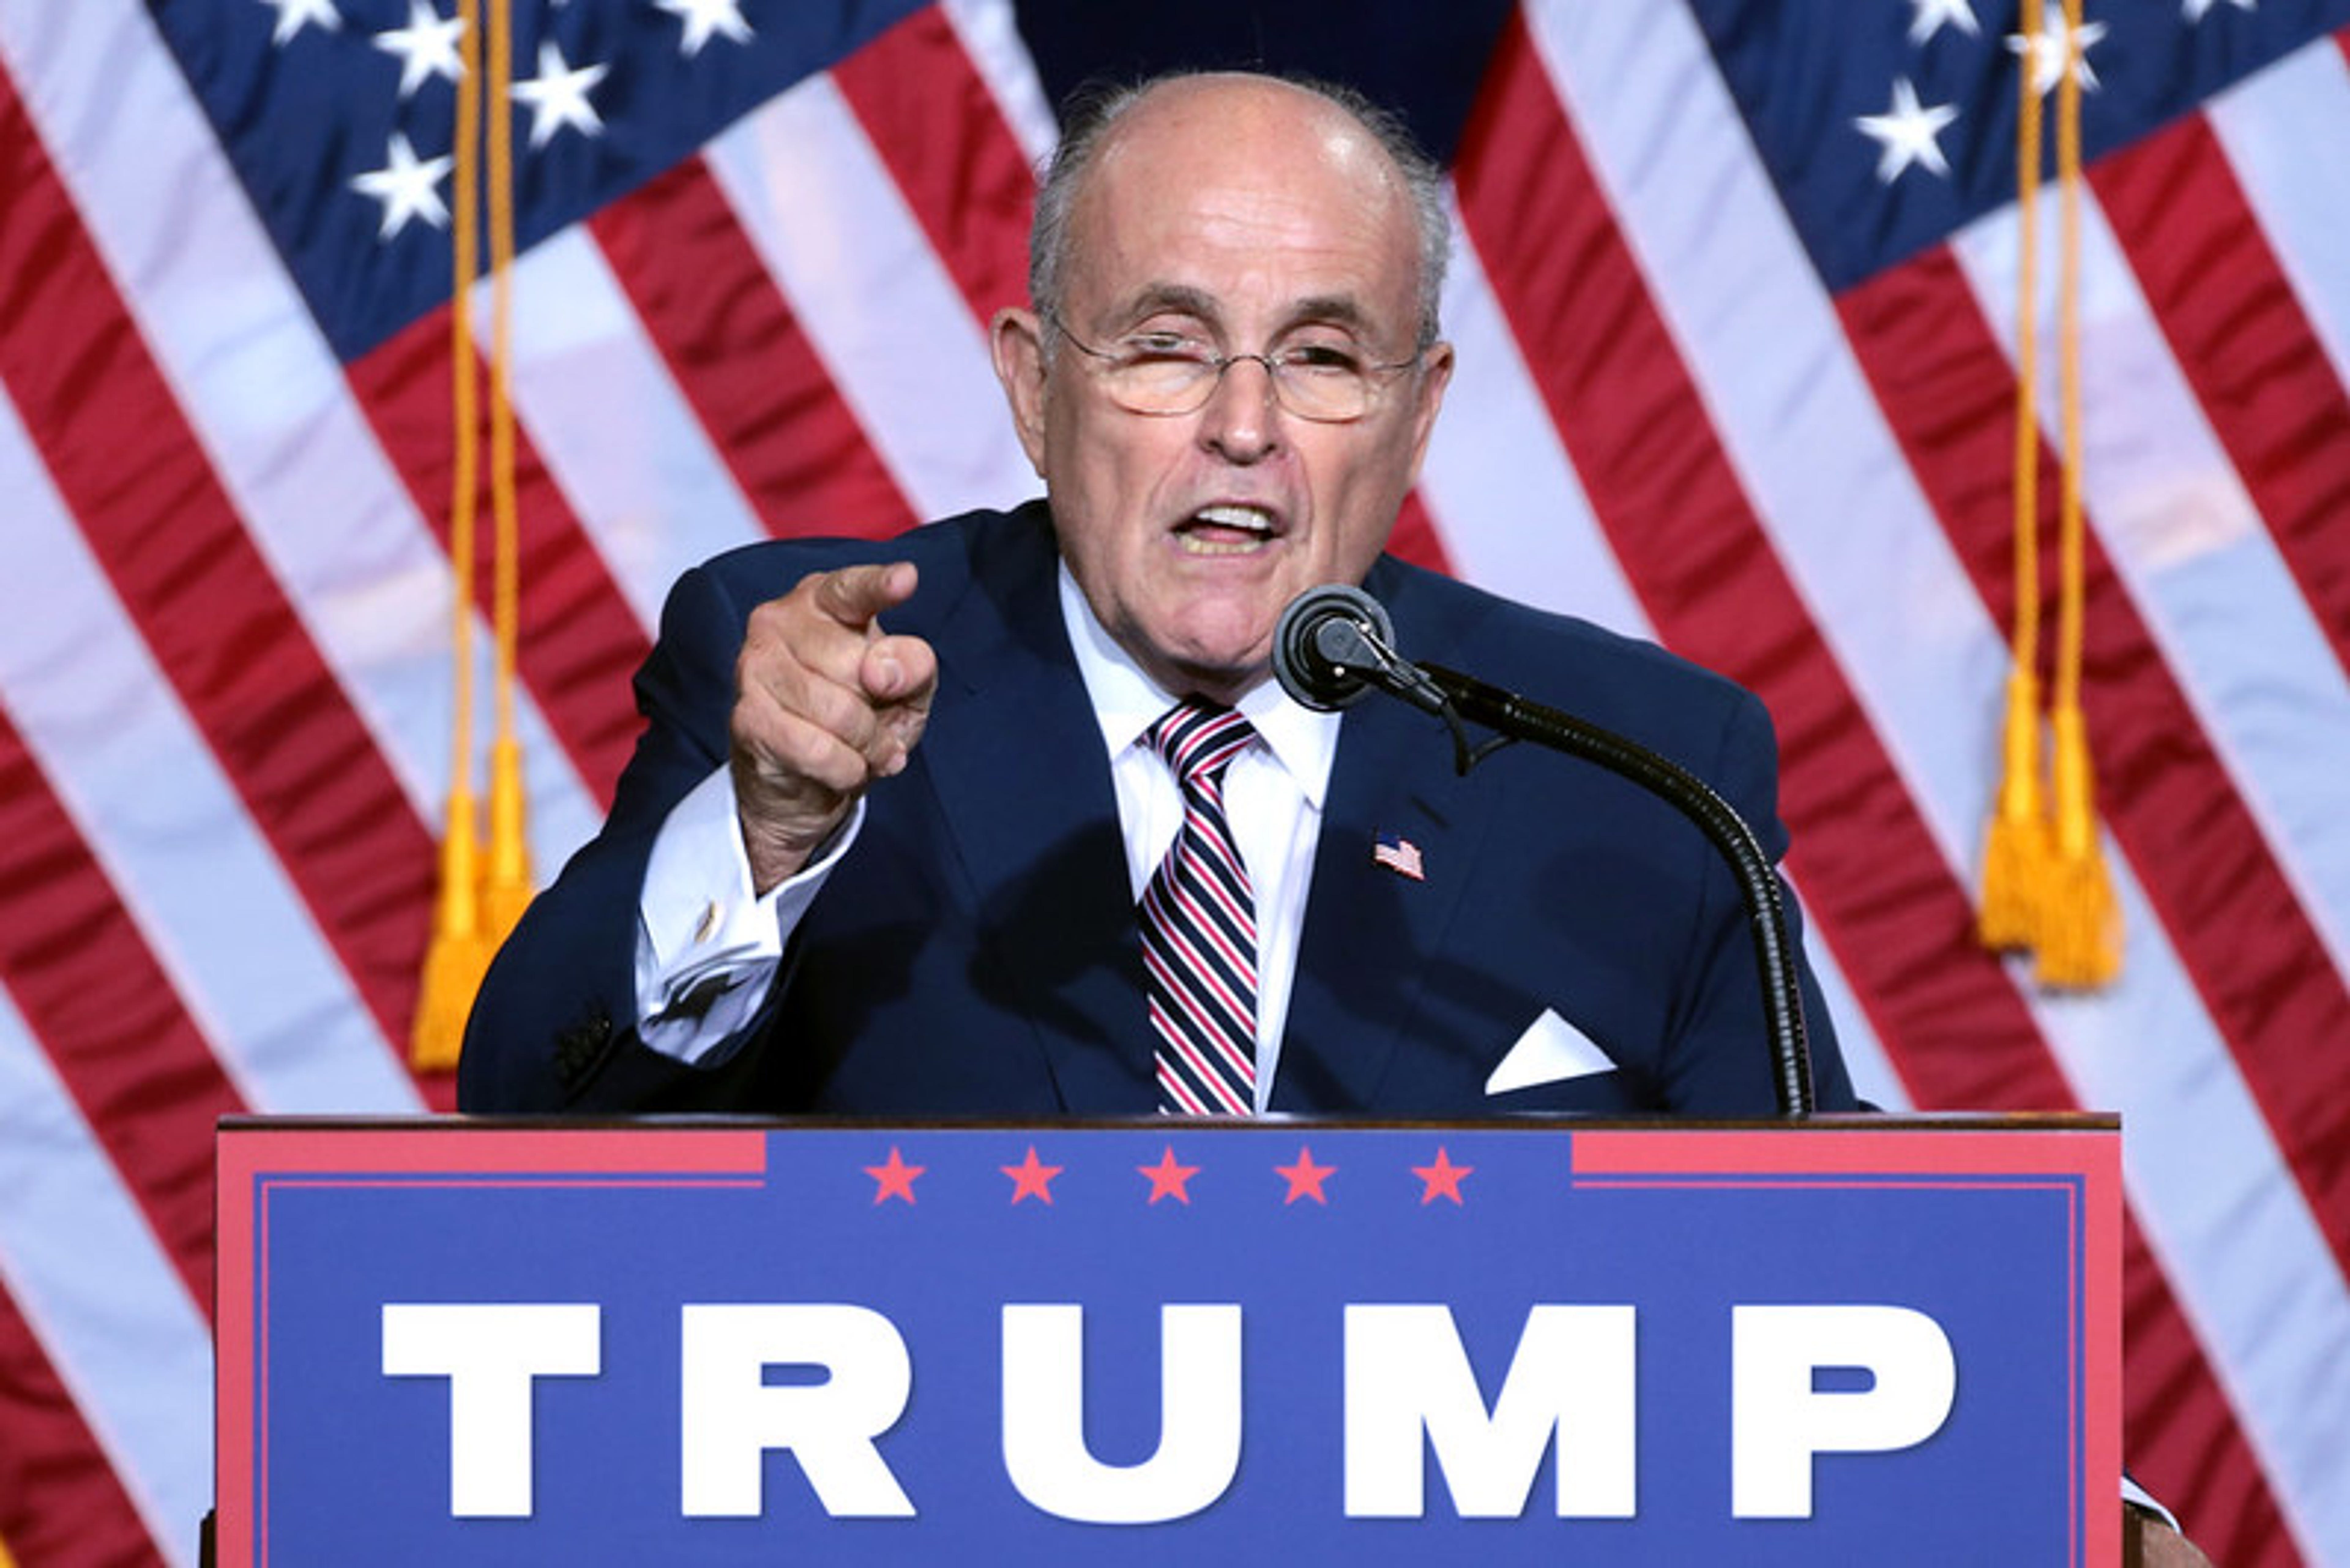 Trending On Twitter: Why Is Rudy Giuliani Selling Discounted Sandals For MyPillow.com?